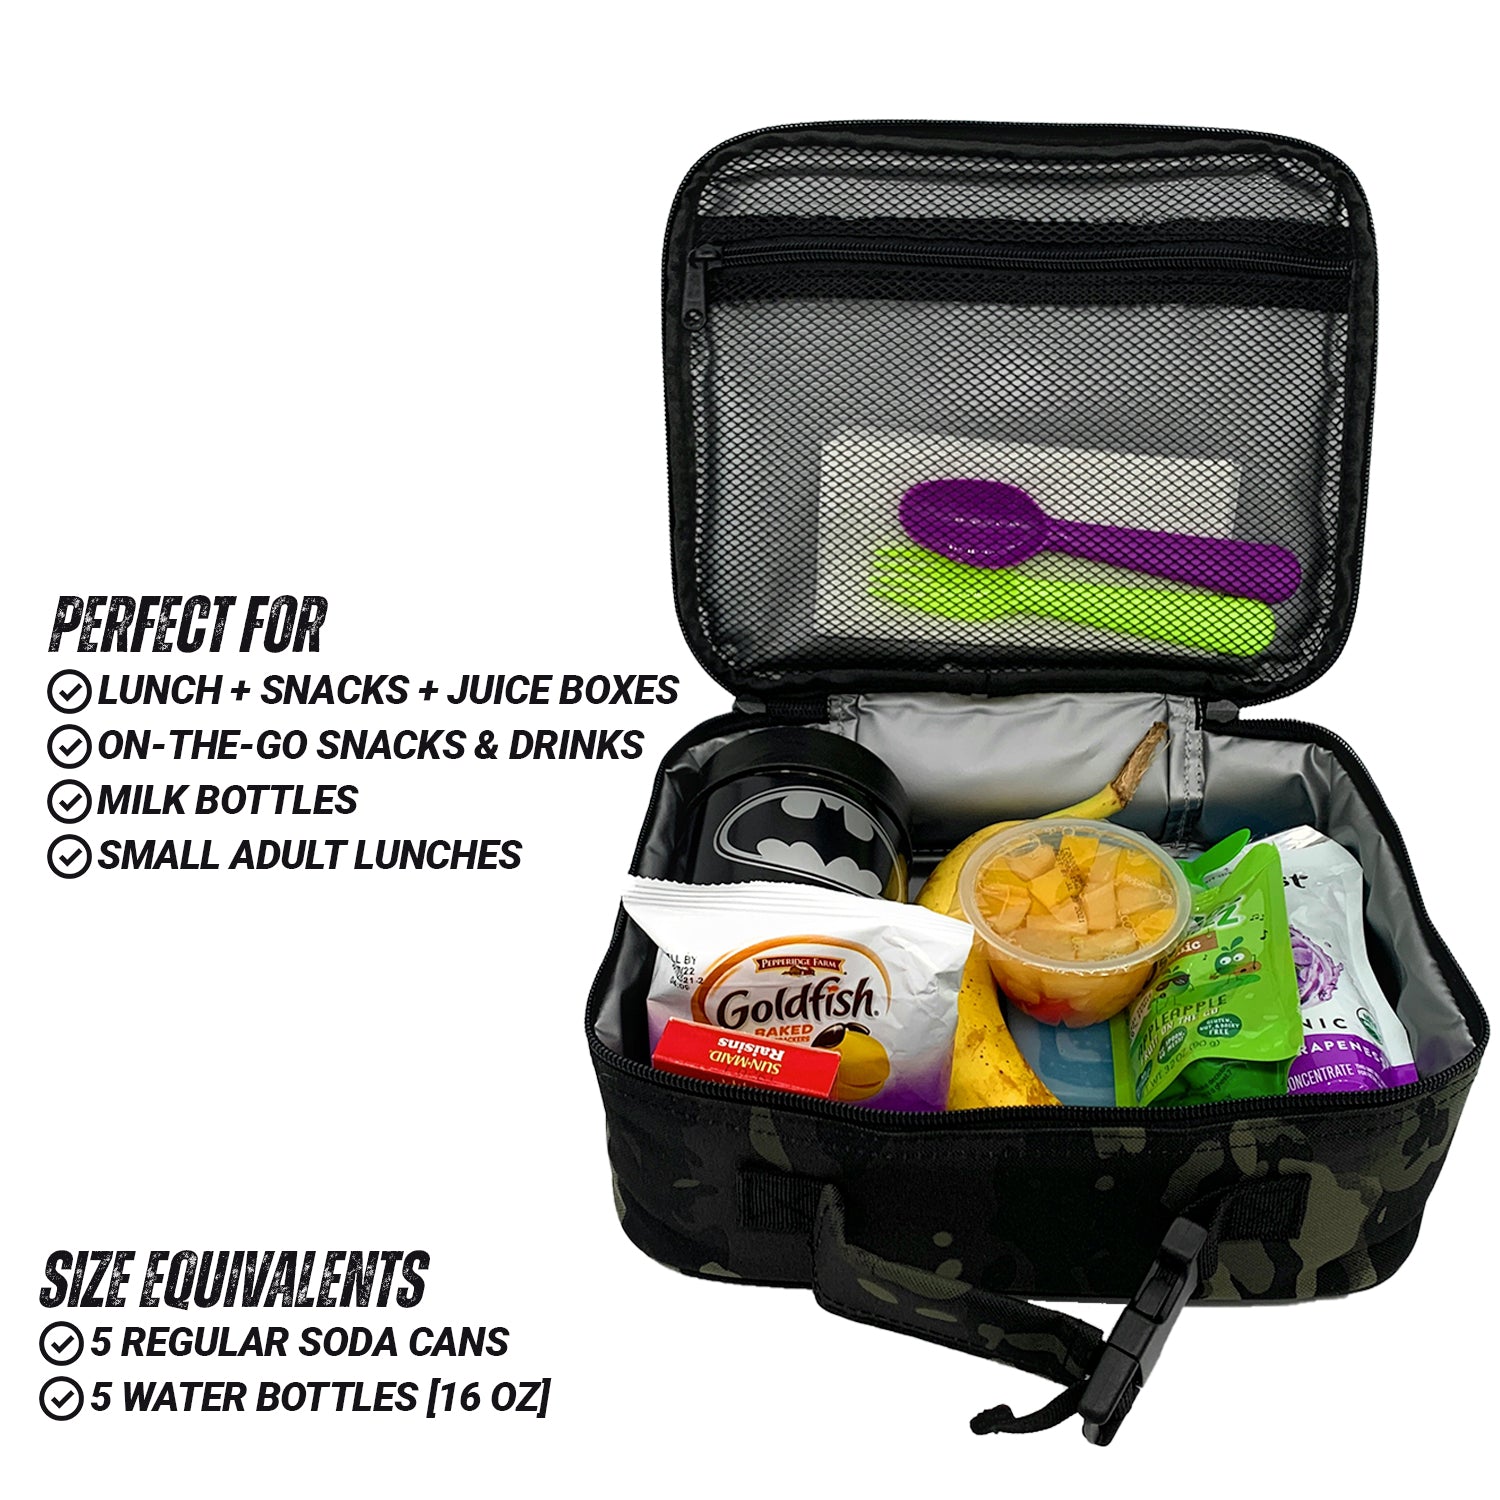 Speed Queen  Clean Kids' Lunch Bags and Backpacks Like a Pro